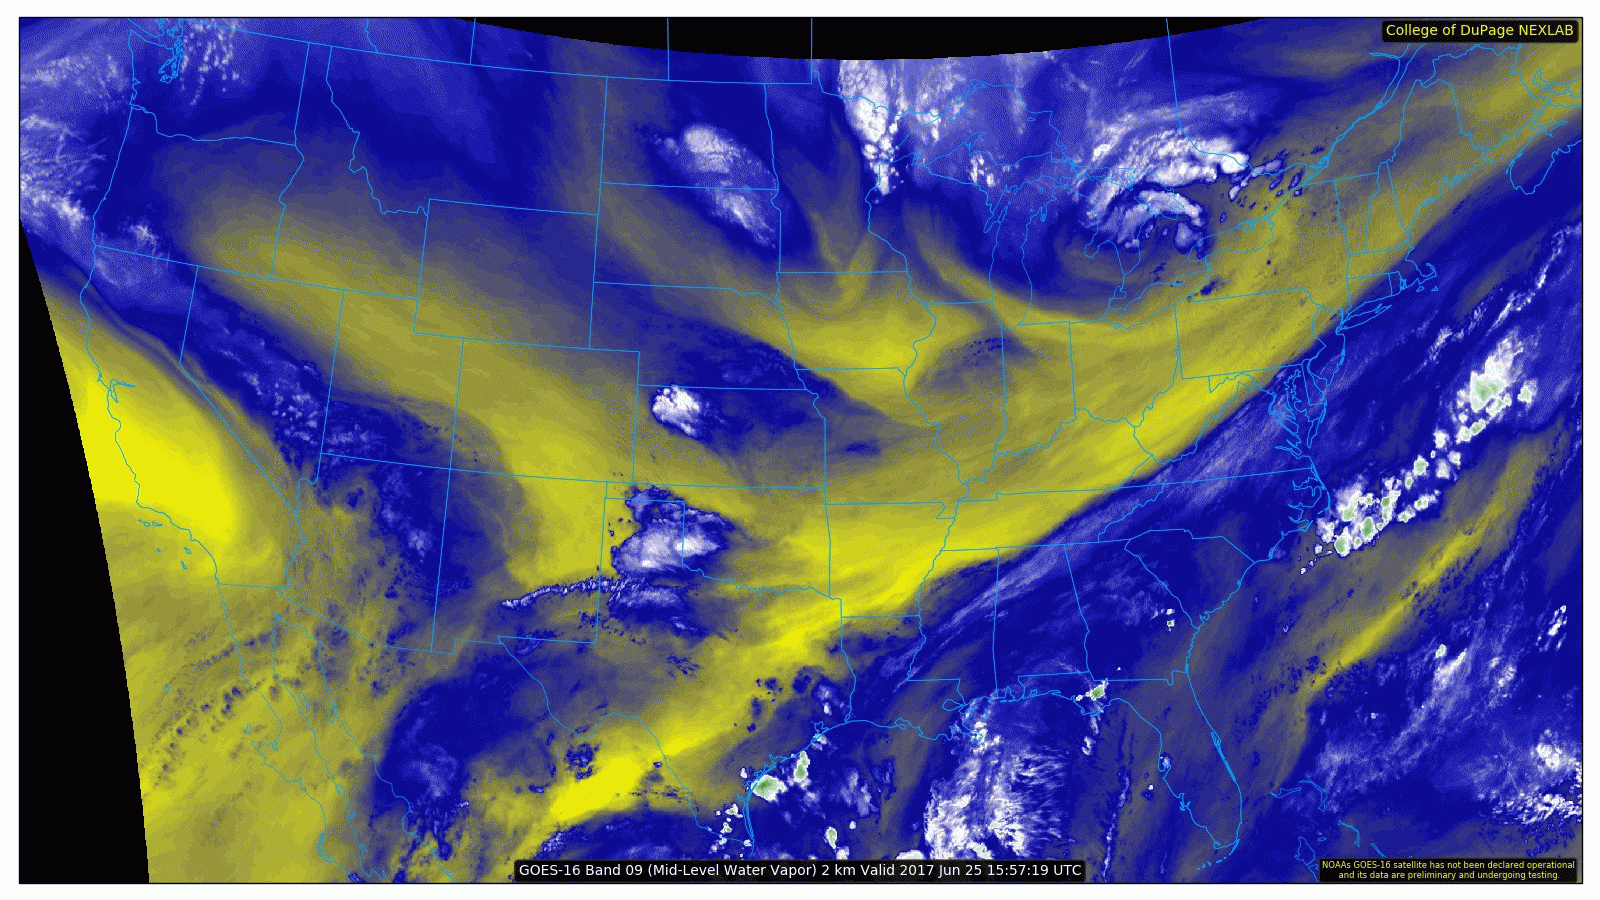 GOES-16 mid-level water vapor imagery|Source: College of DuPage